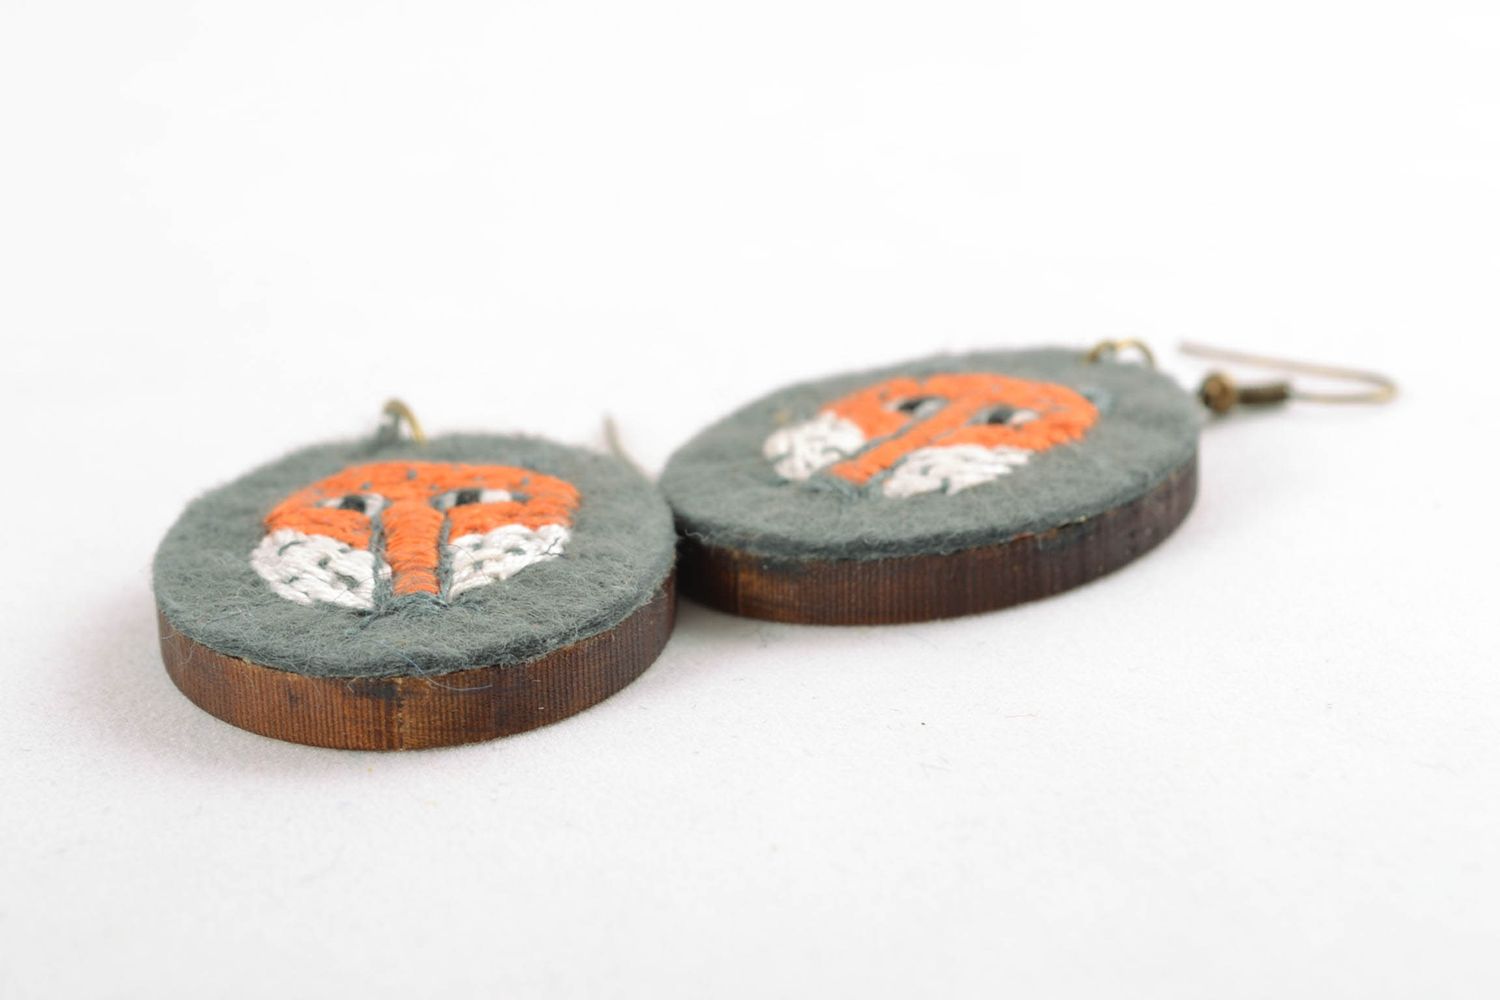 Handmade wooden earrings with satin stitch embroidery photo 3